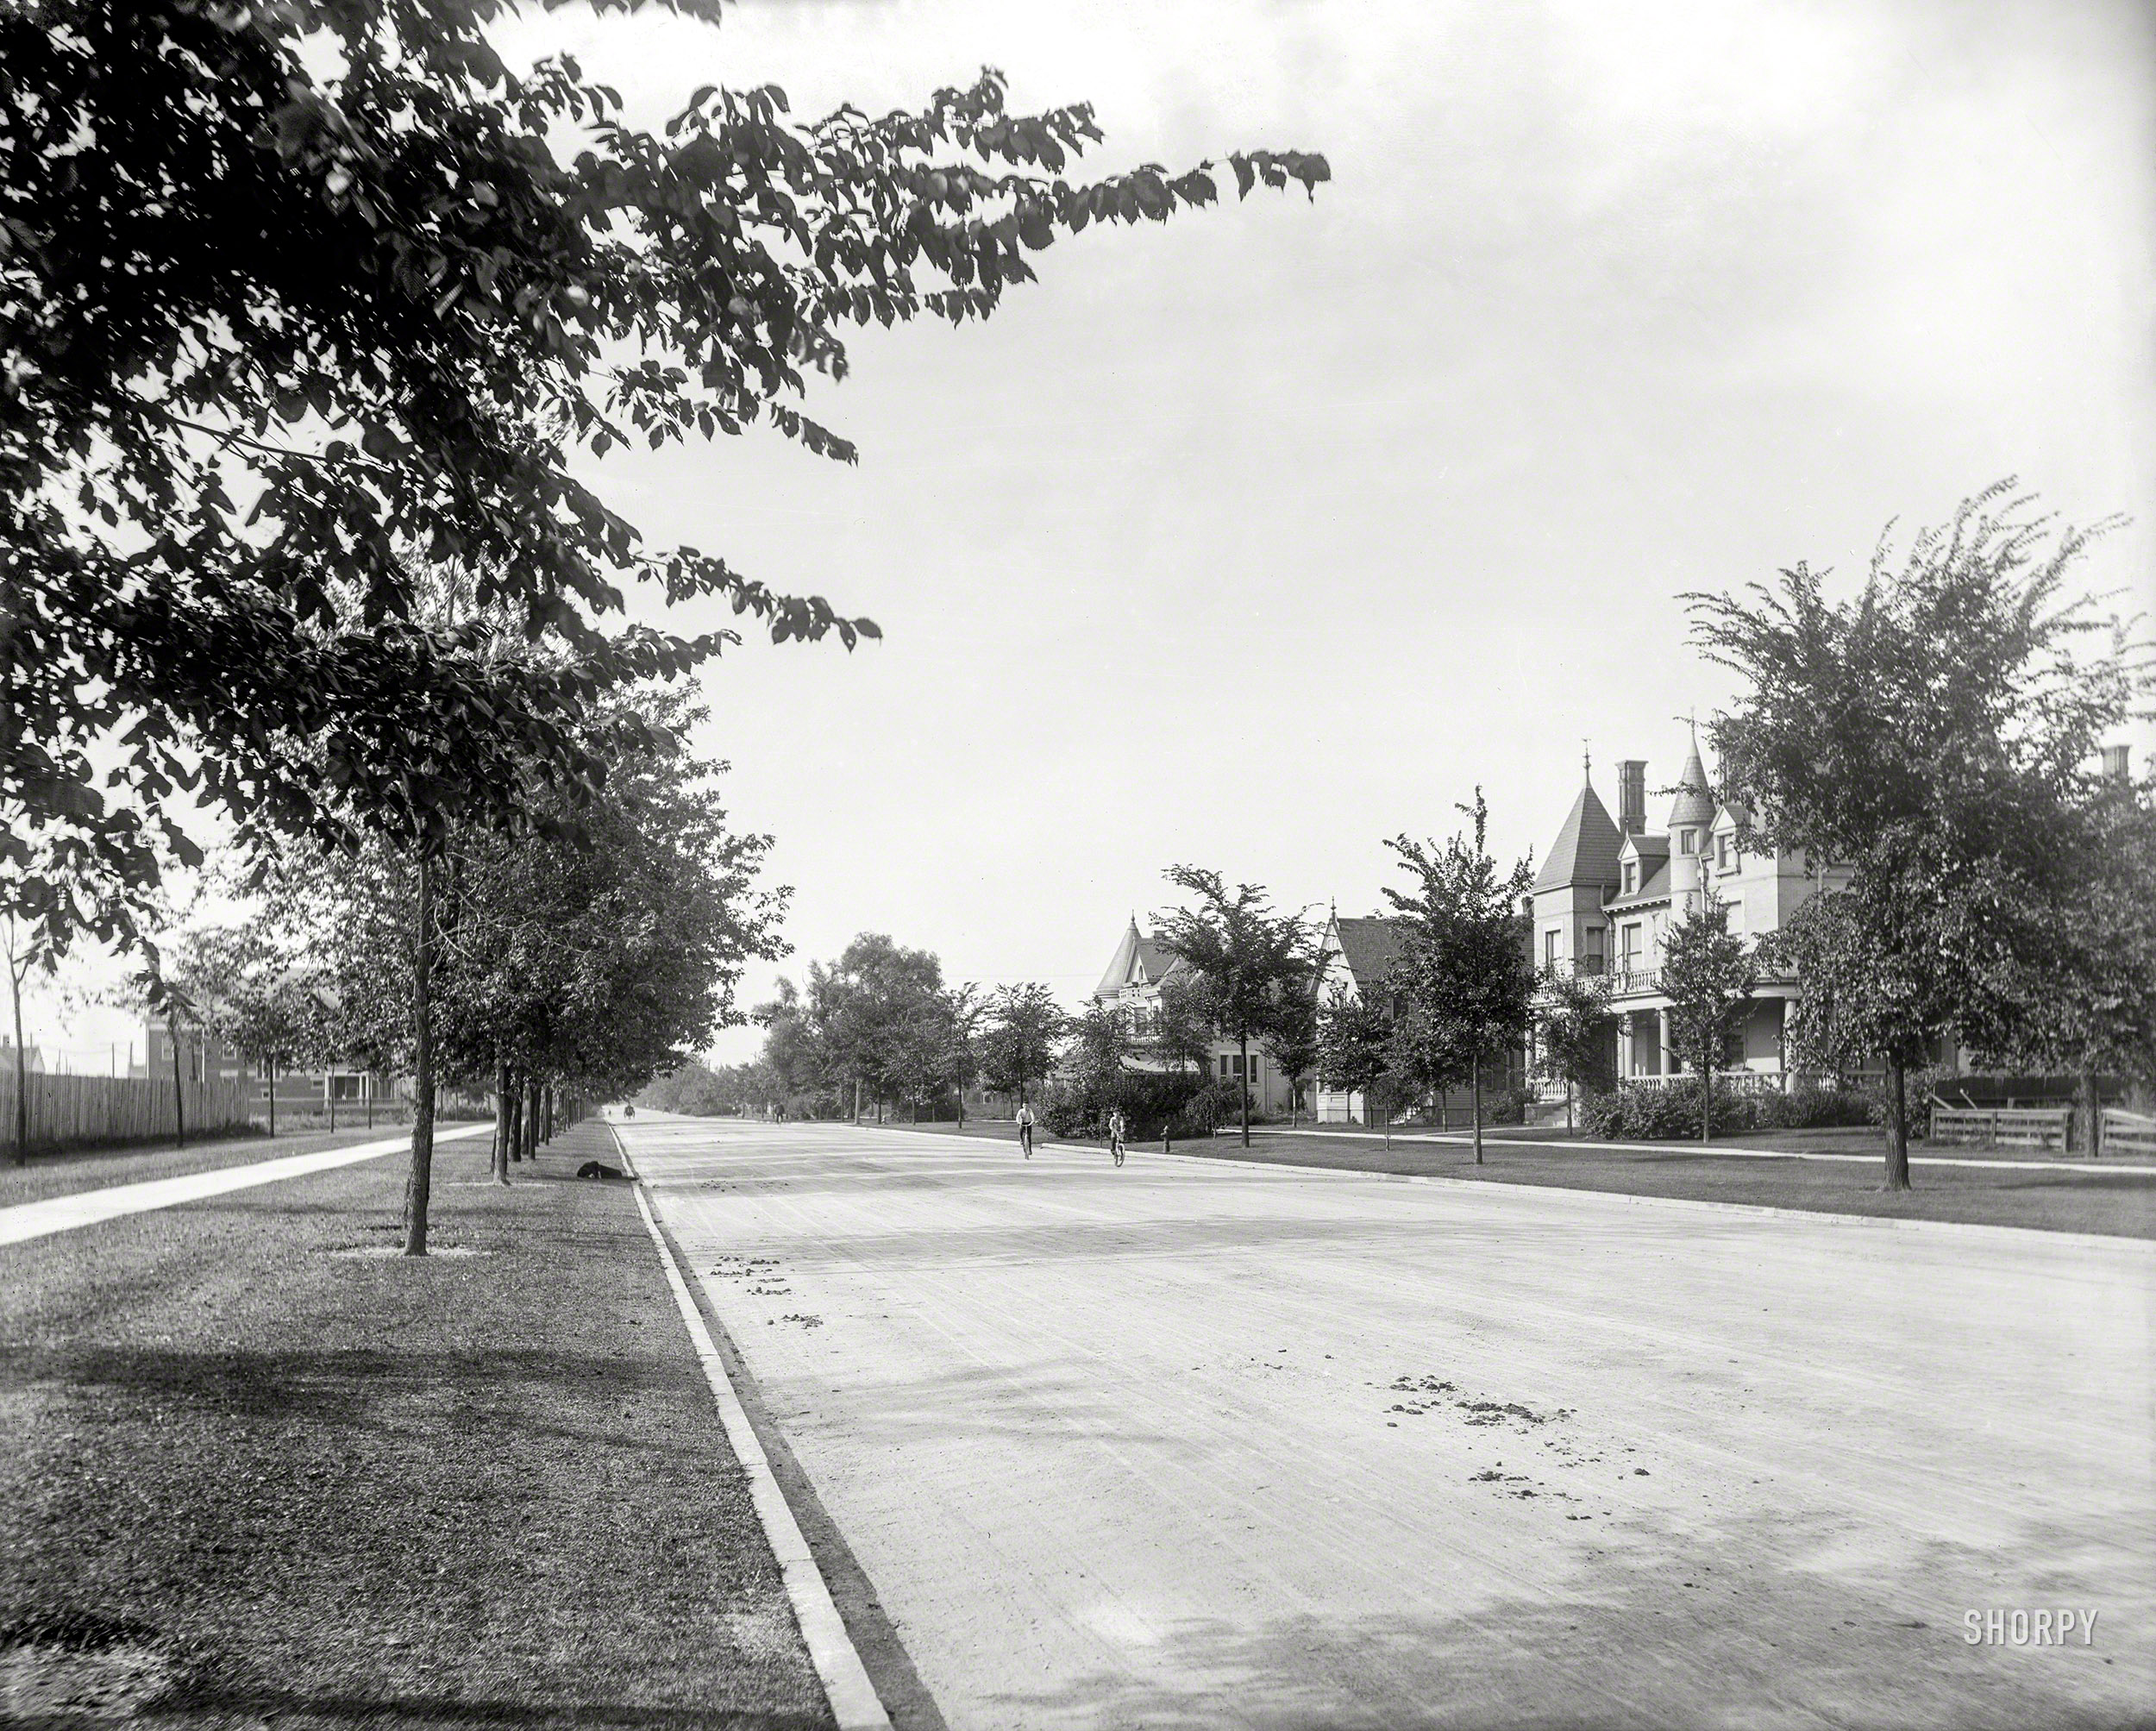 1902. "Residences on East Grand Boulevard, Detroit, Michigan." 8x10 inch dry plate glass negative, Detroit Photographic Company. View full size.